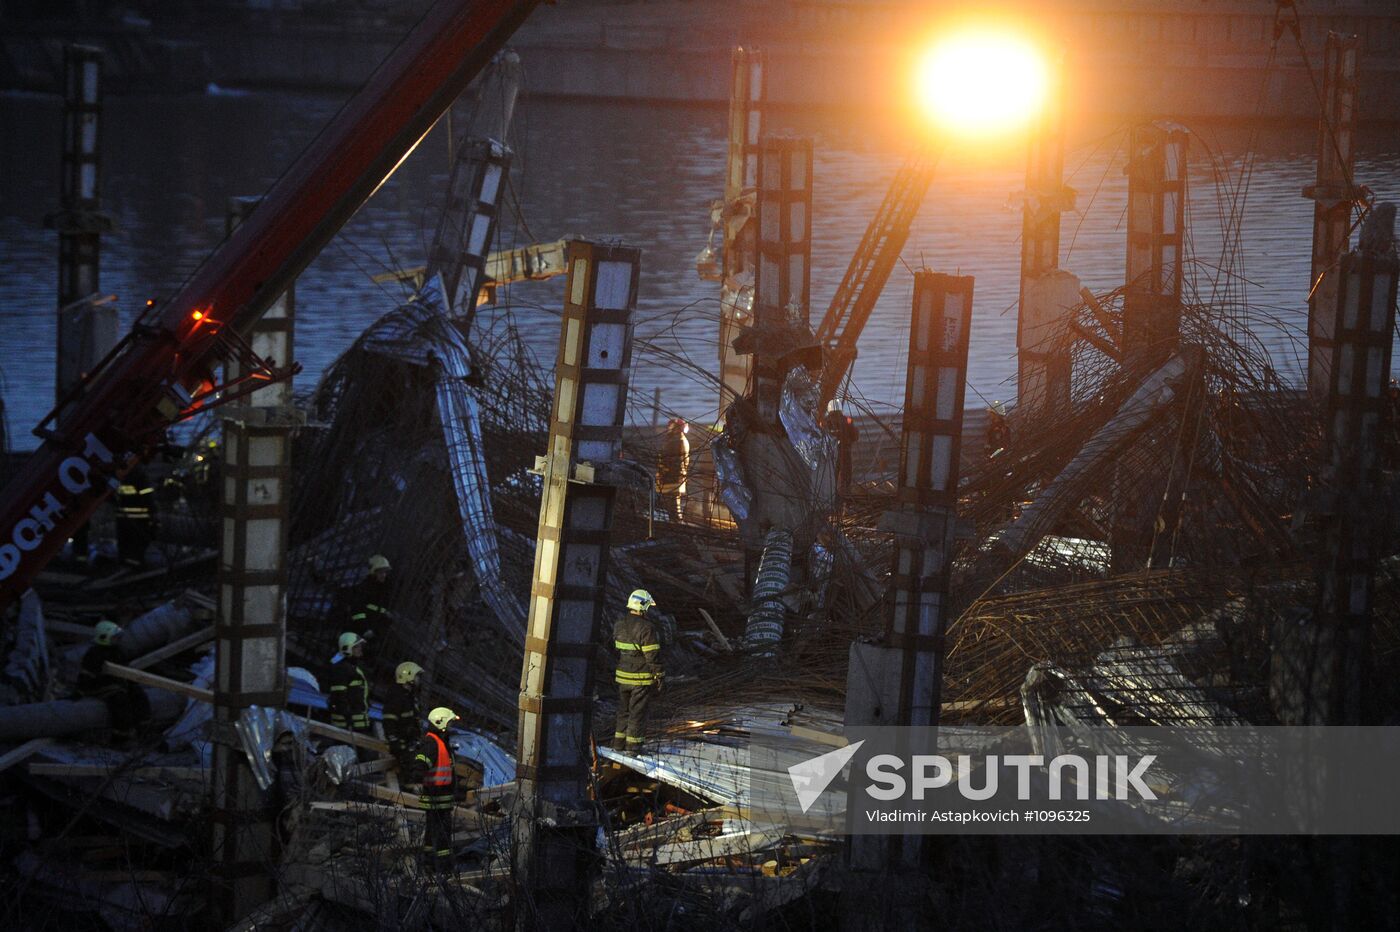 Collapse of building under construction in southern Moscow